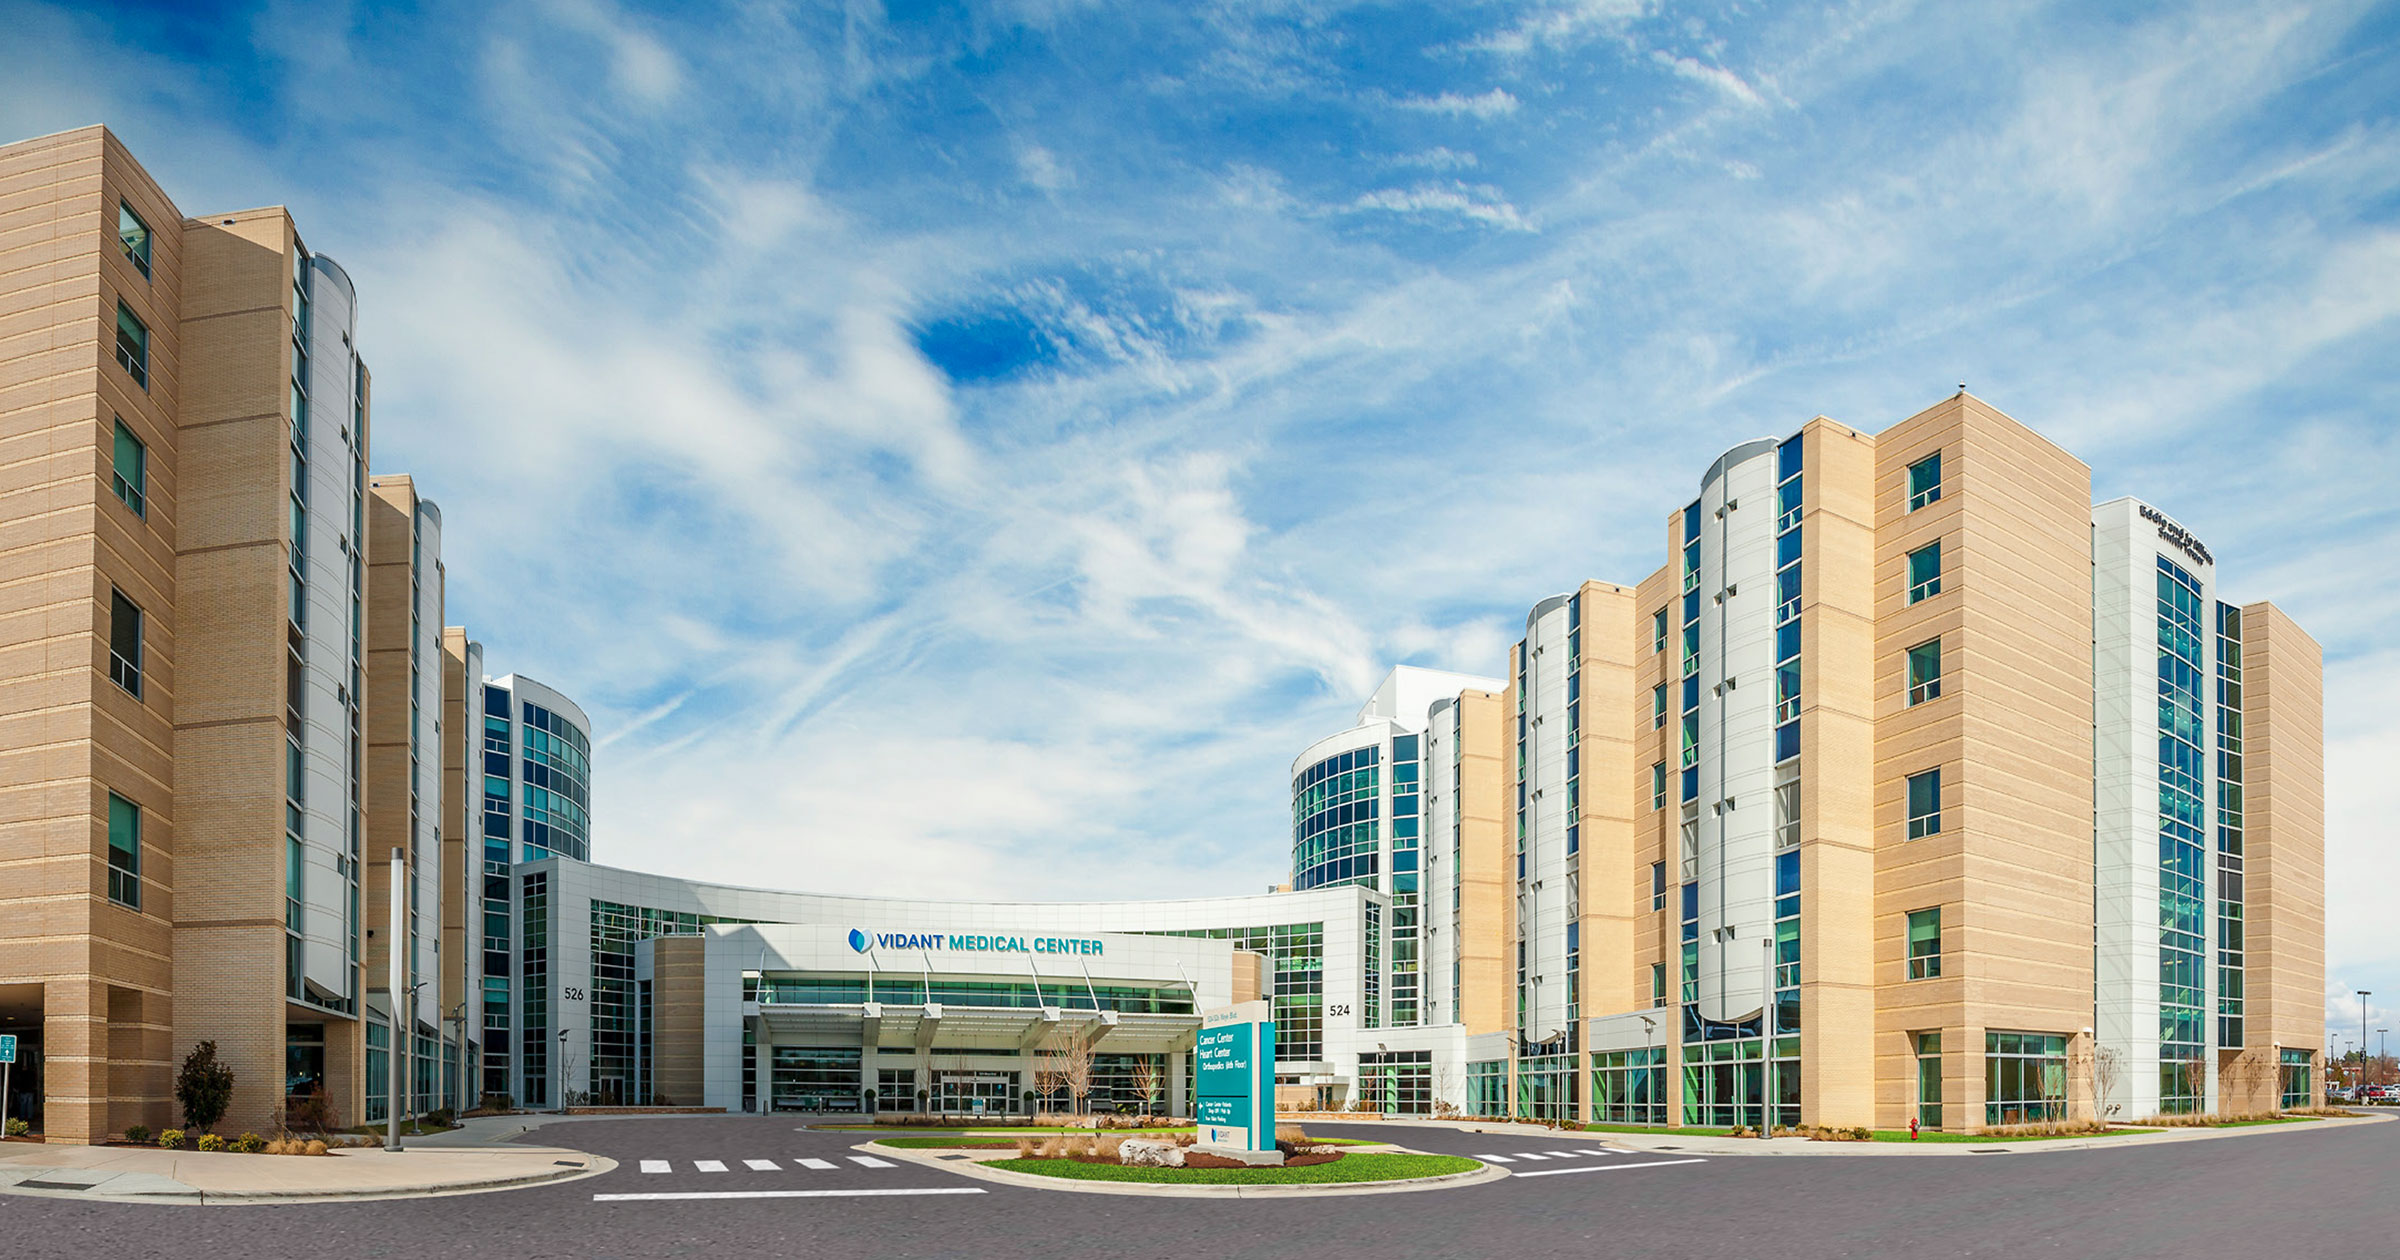 An image of the front drive of the Vidant Hospital in Greenville, North Carolina.